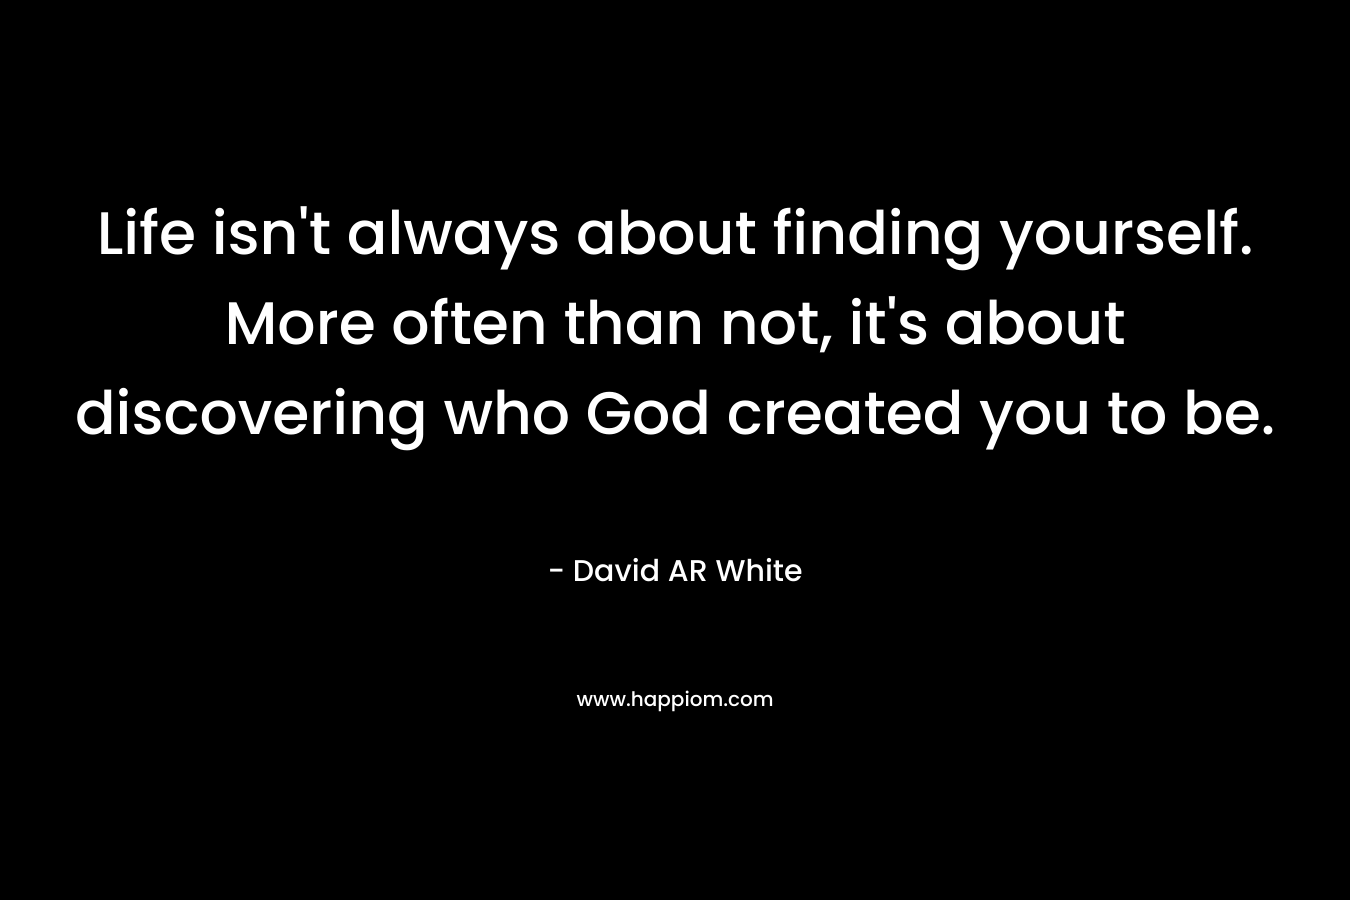 Life isn’t always about finding yourself. More often than not, it’s about discovering who God created you to be. – David AR White